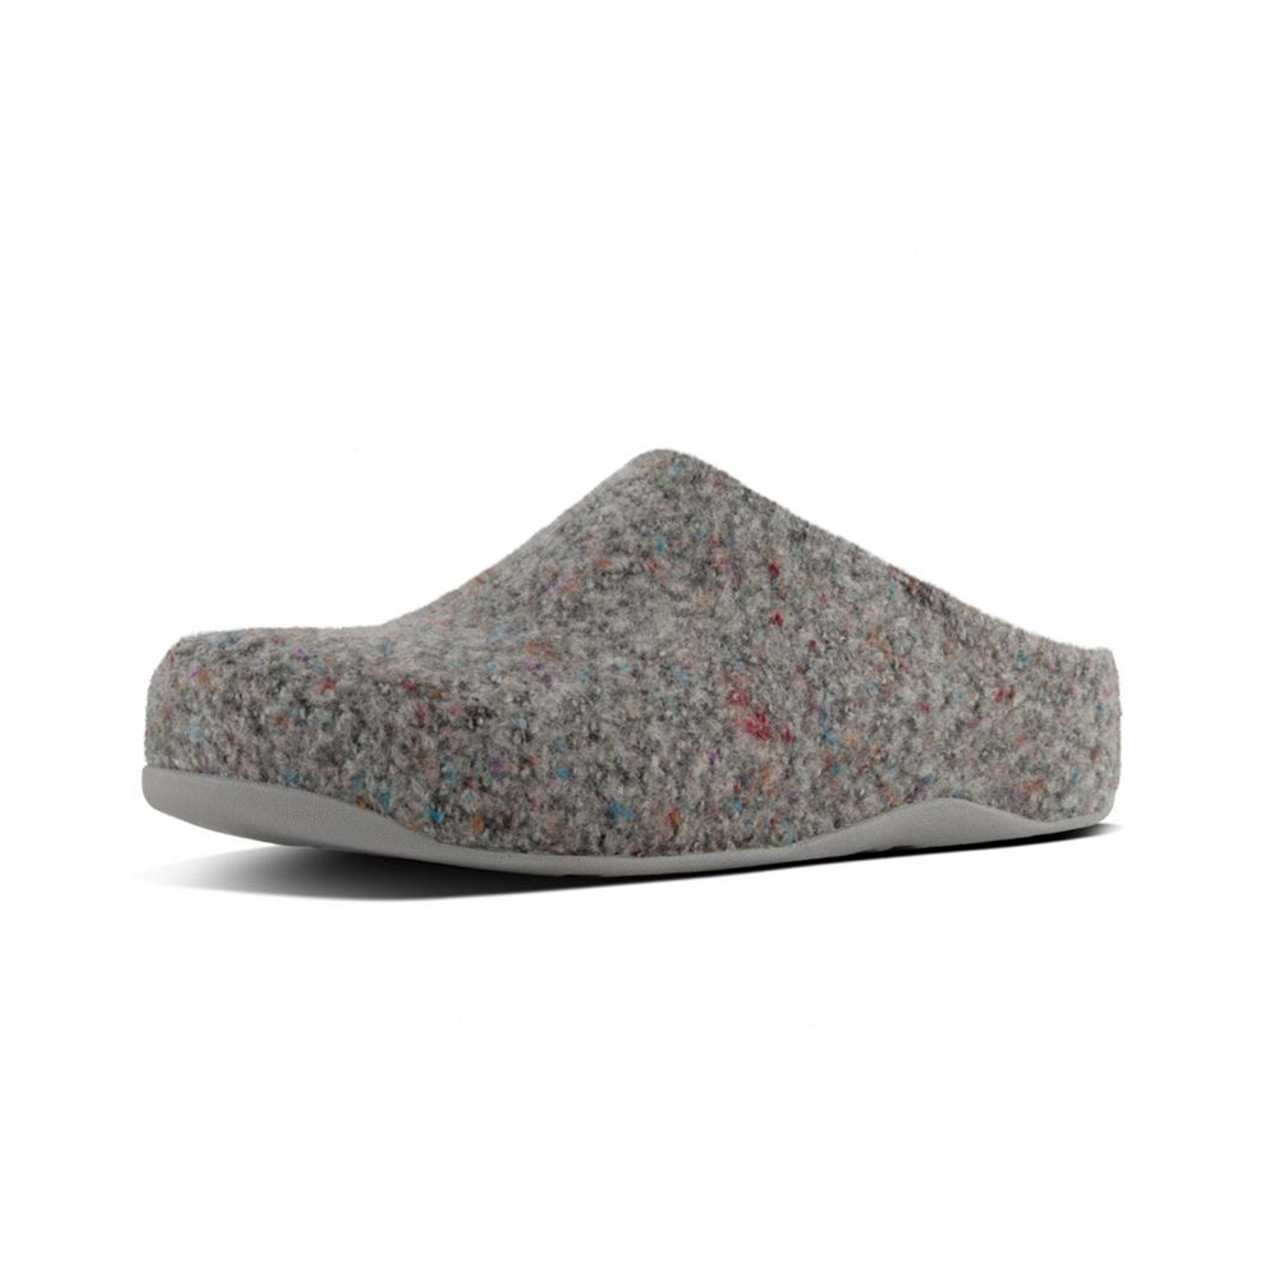 Fitflop Women's Shuv Felt Clog - Grey | Discount Fitflop Ladies Shoes ...